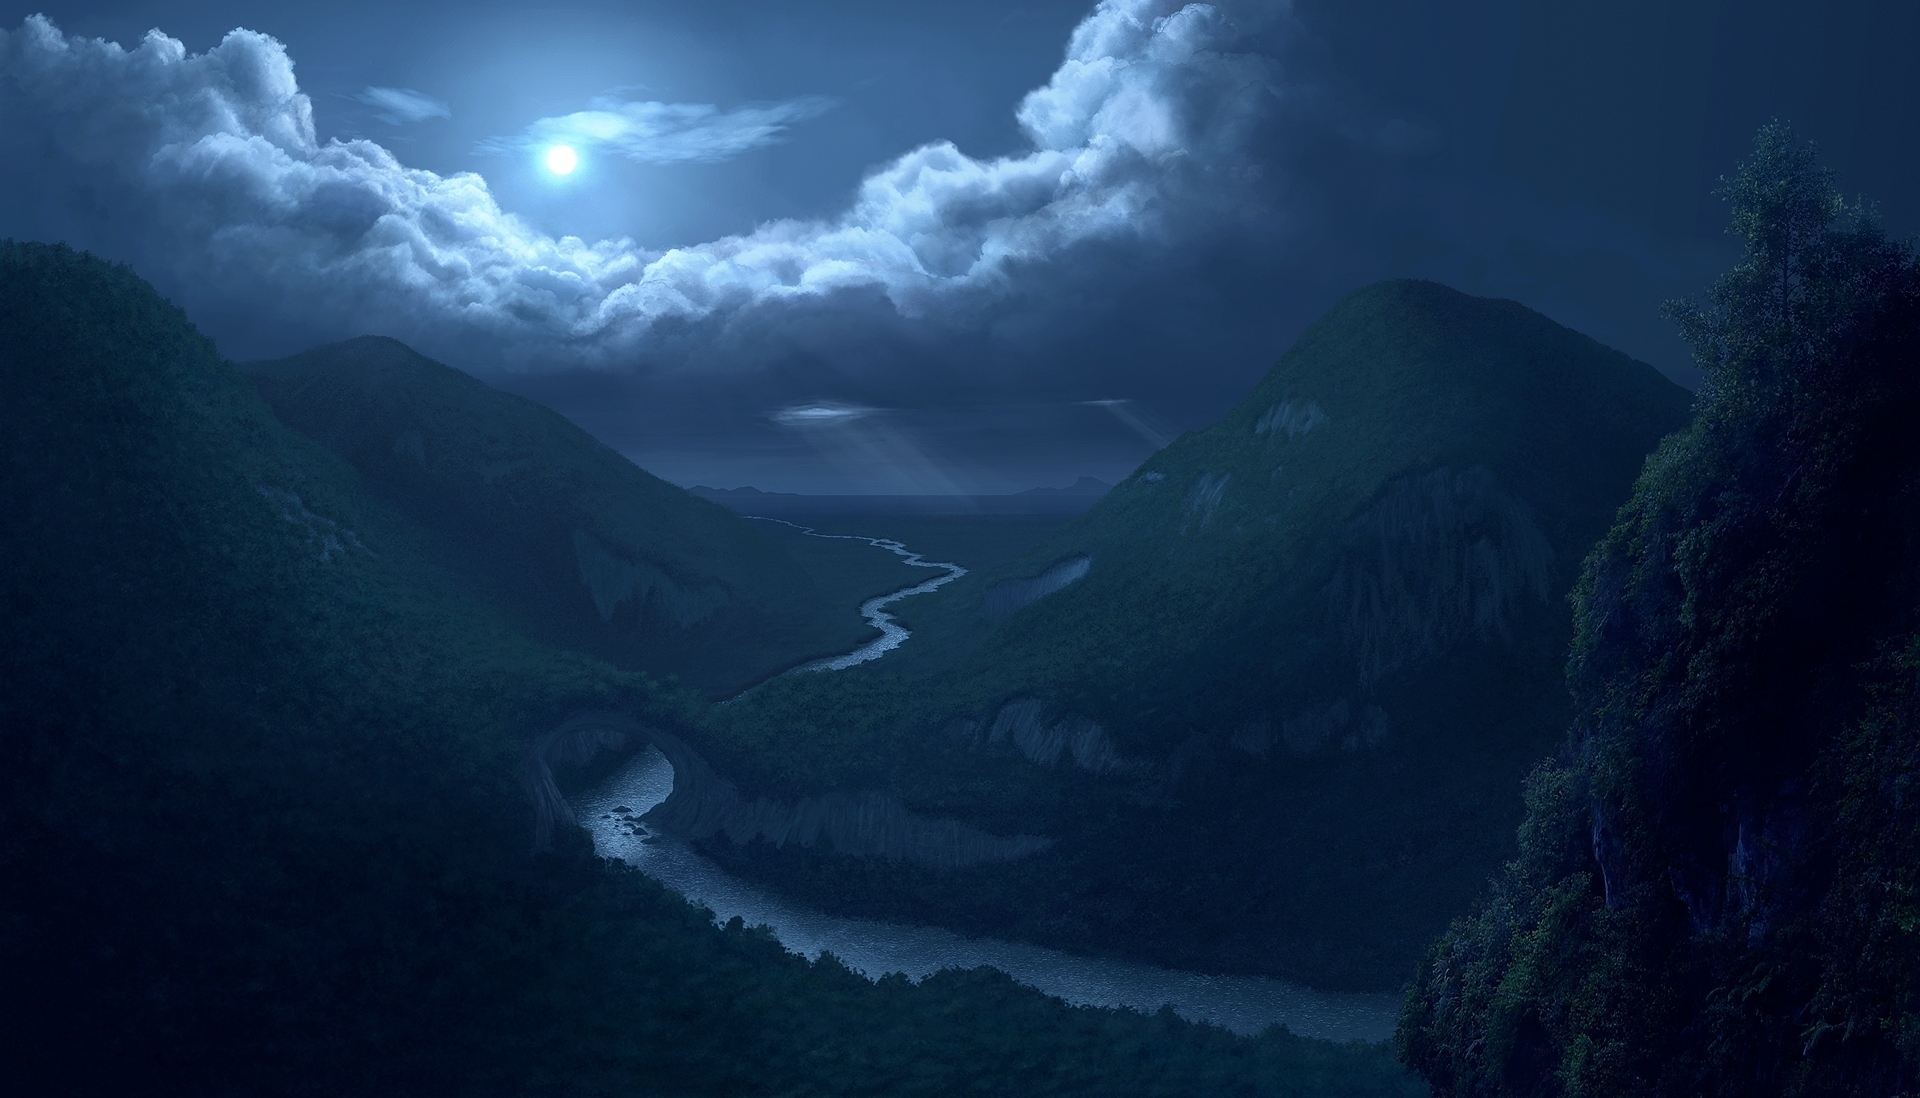 Night River Path Trough Mountains With Blue Moon Wallpaper - Night Cloud Digital Painting - HD Wallpaper 